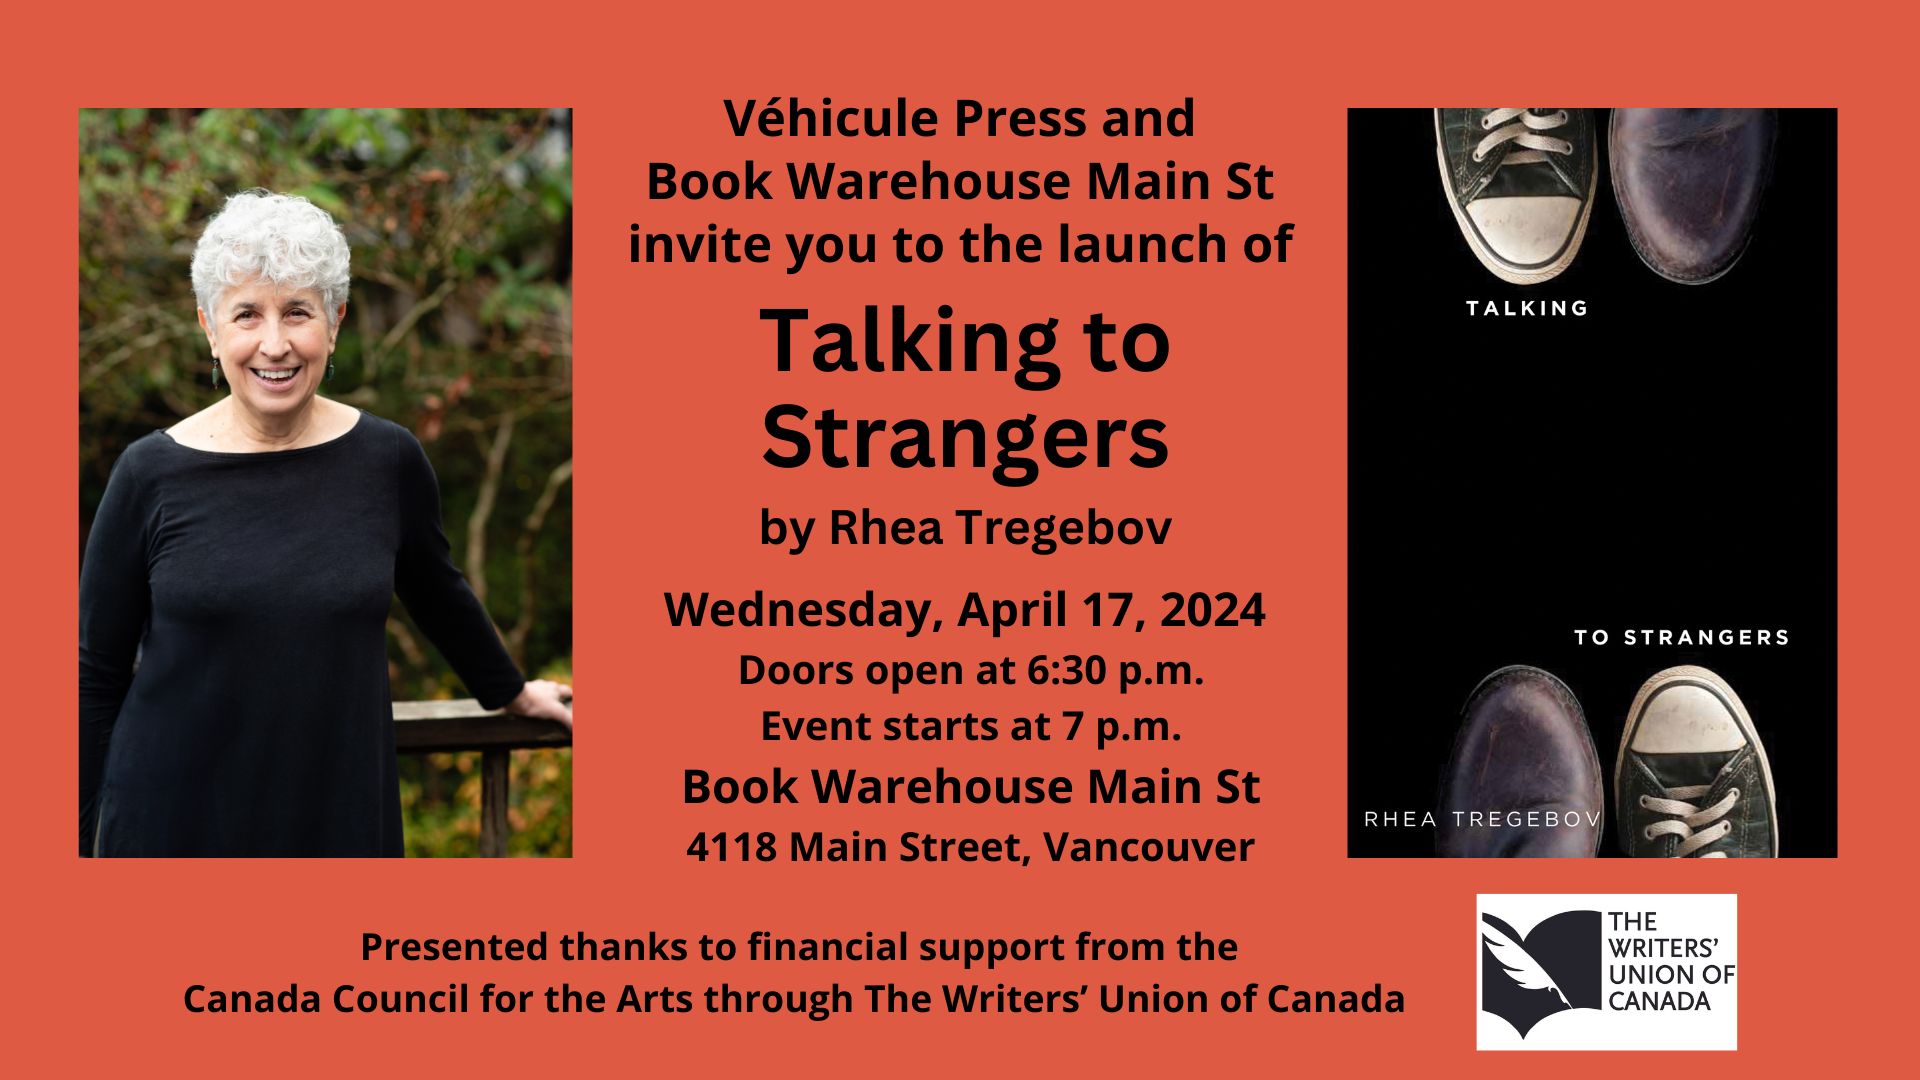 Promotional image for Vancouver launch of Talking to Strangers